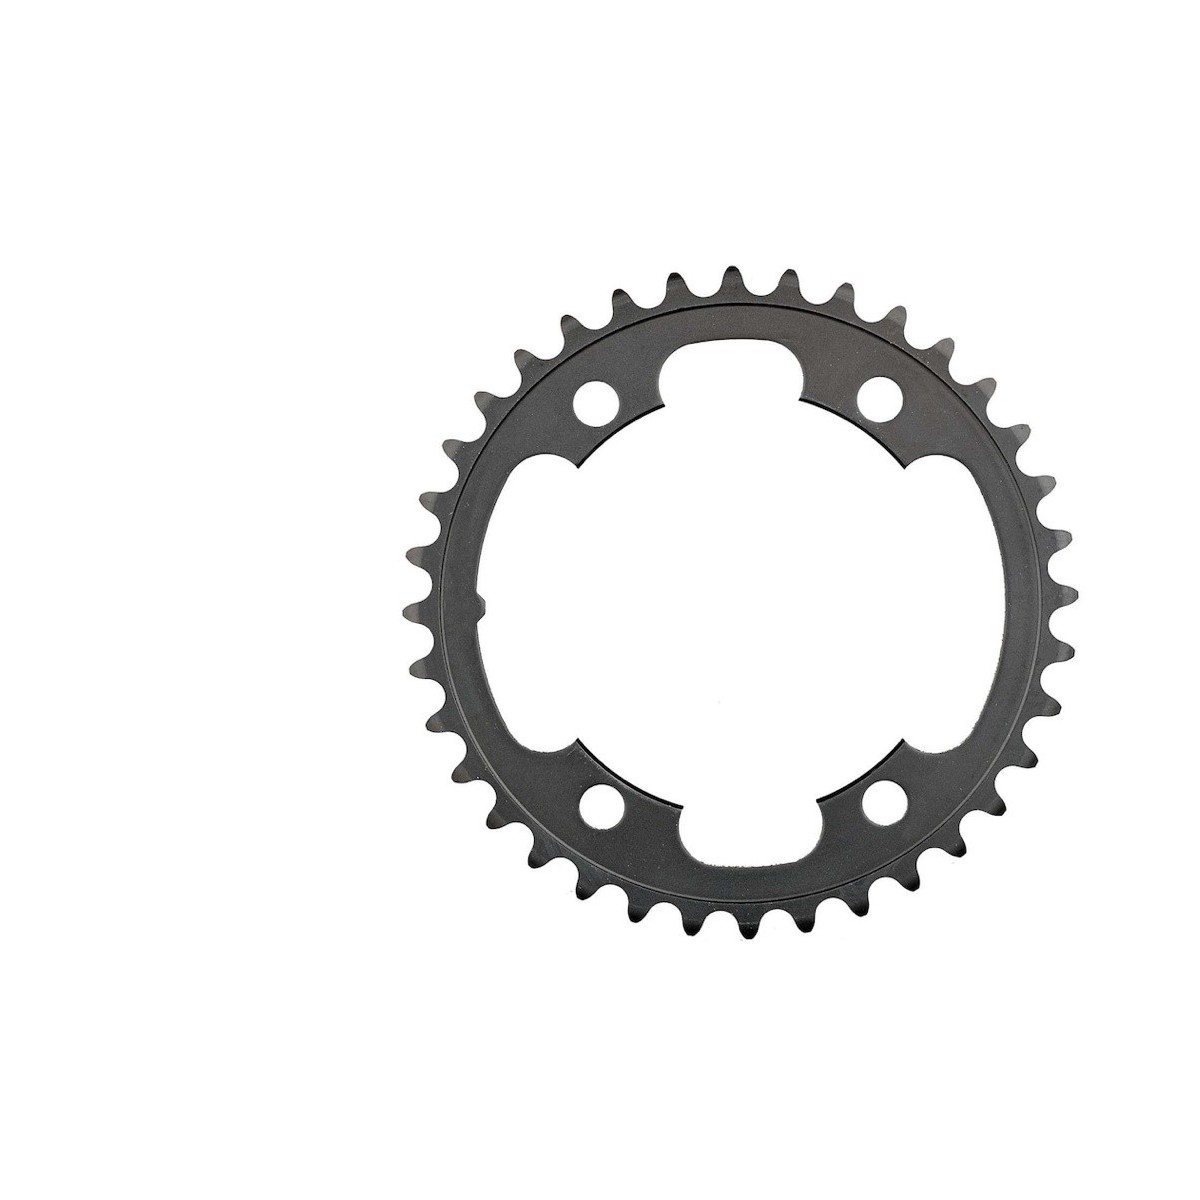 Shimano FC-4700 Chainring 34T-MK For 50-34T 